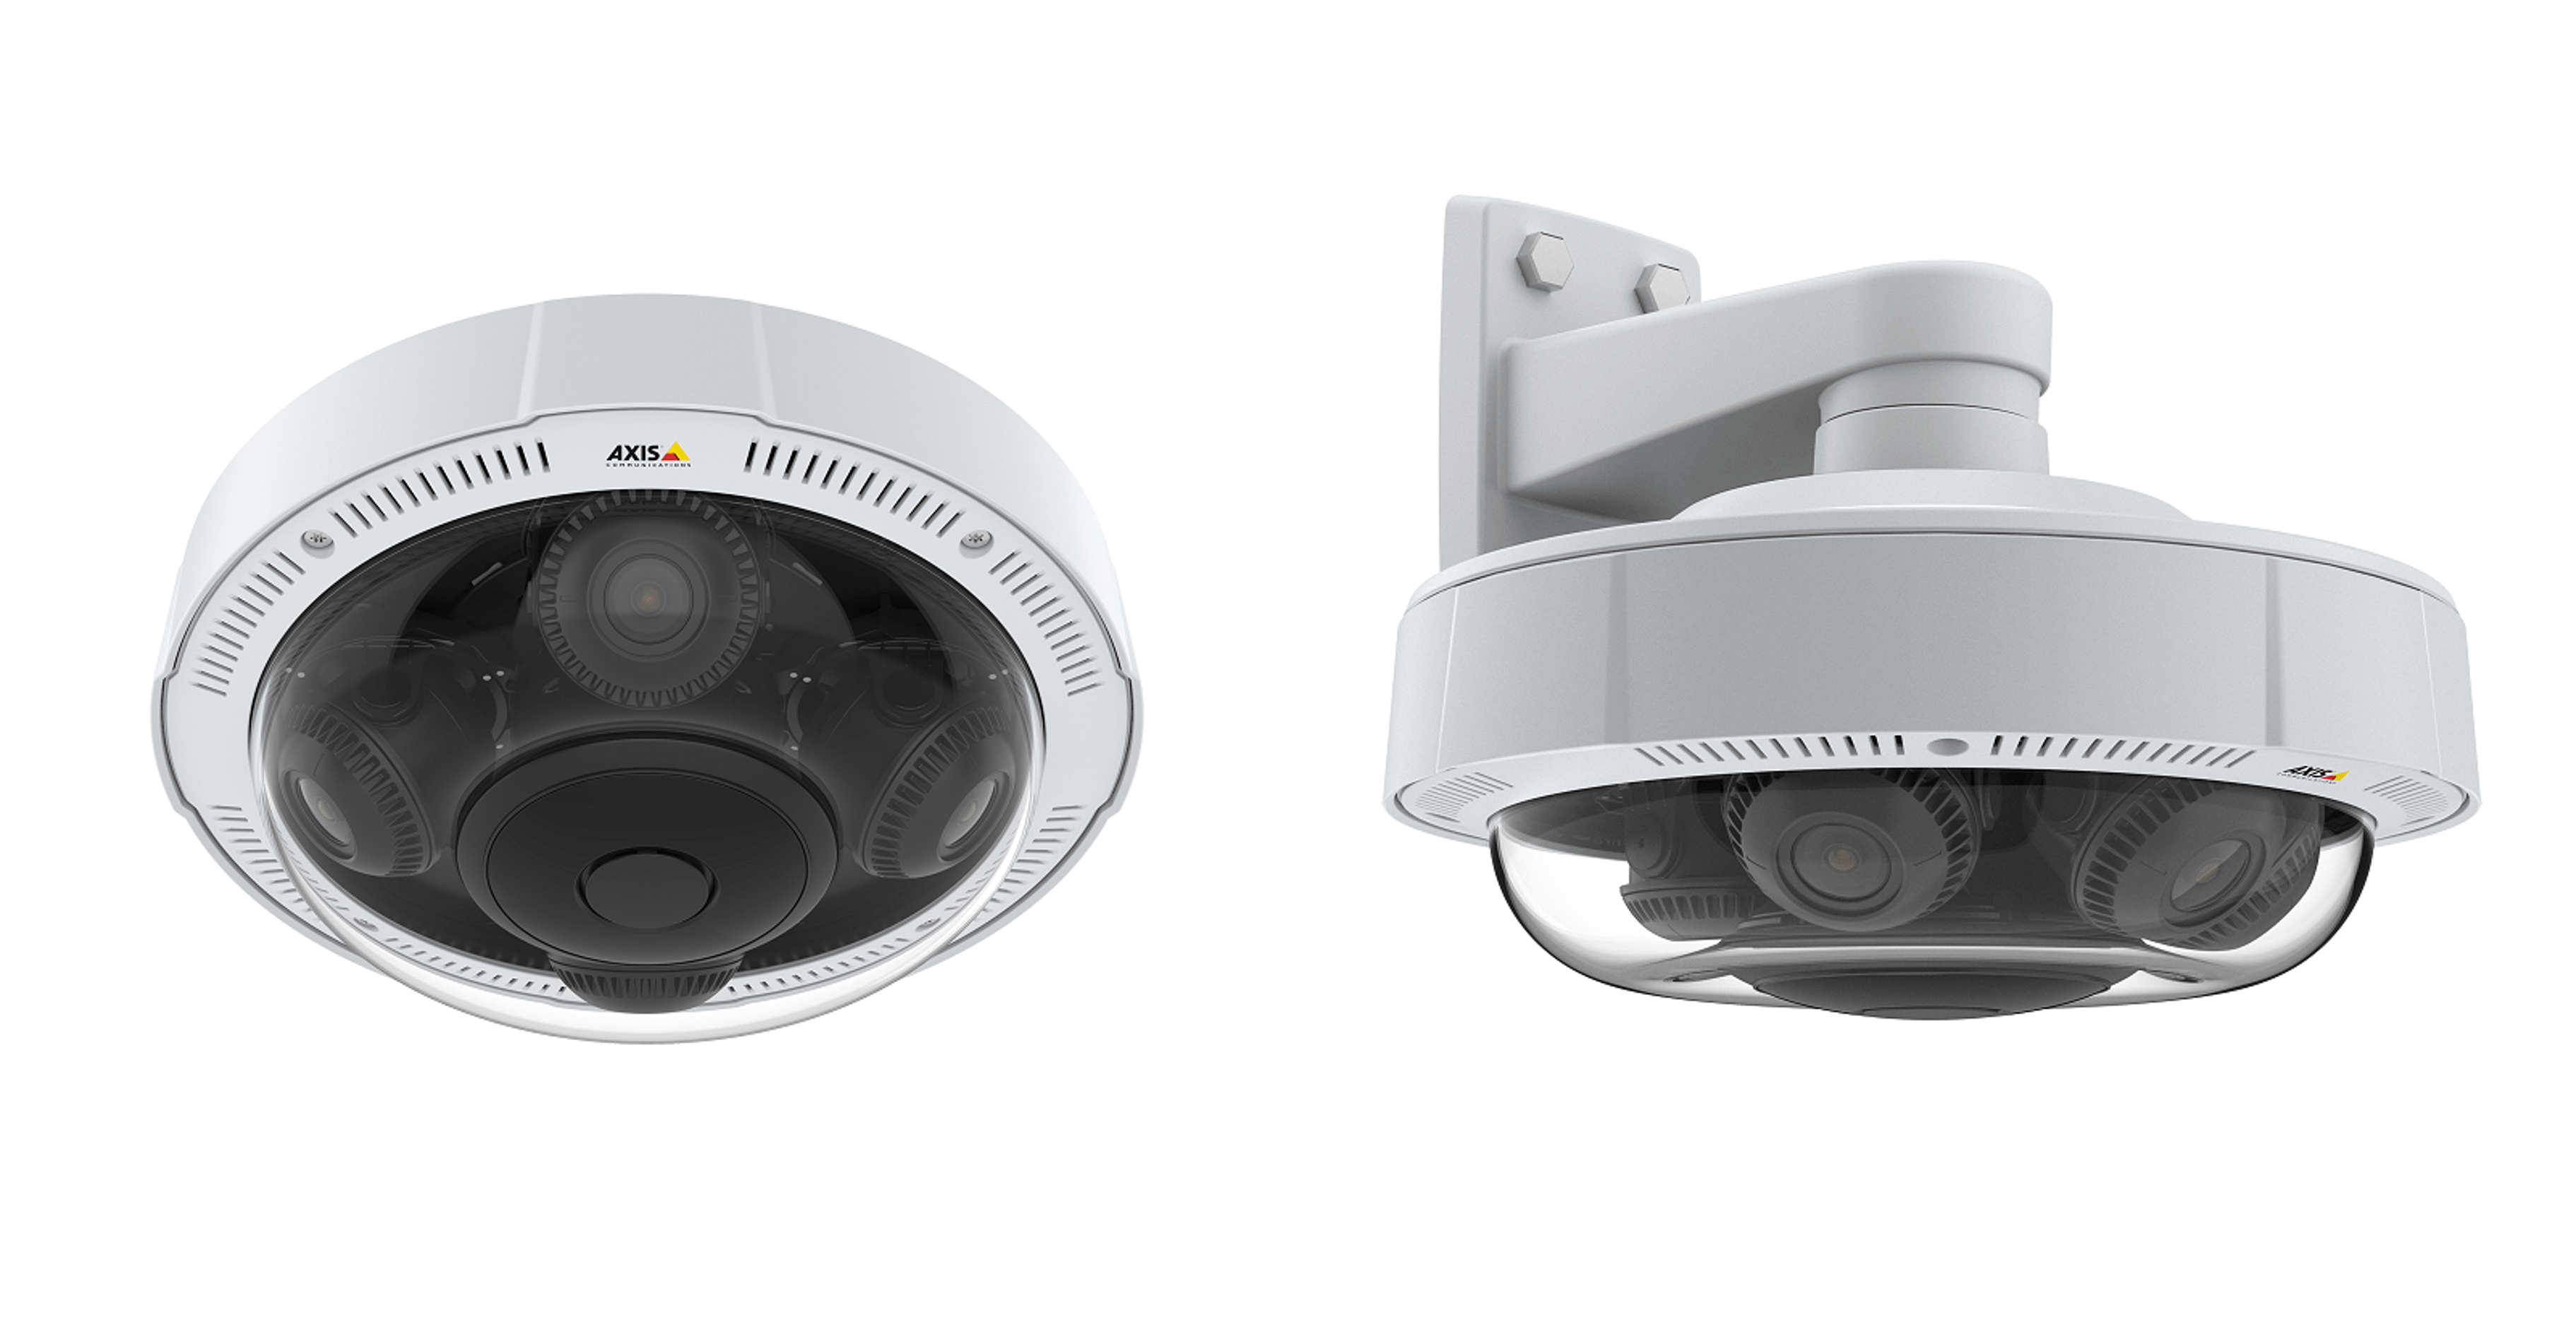 Axis 01500-001 P3719-PLE Network - 15 MP Multidirectional Camera w/ IR for 360deg Coverage